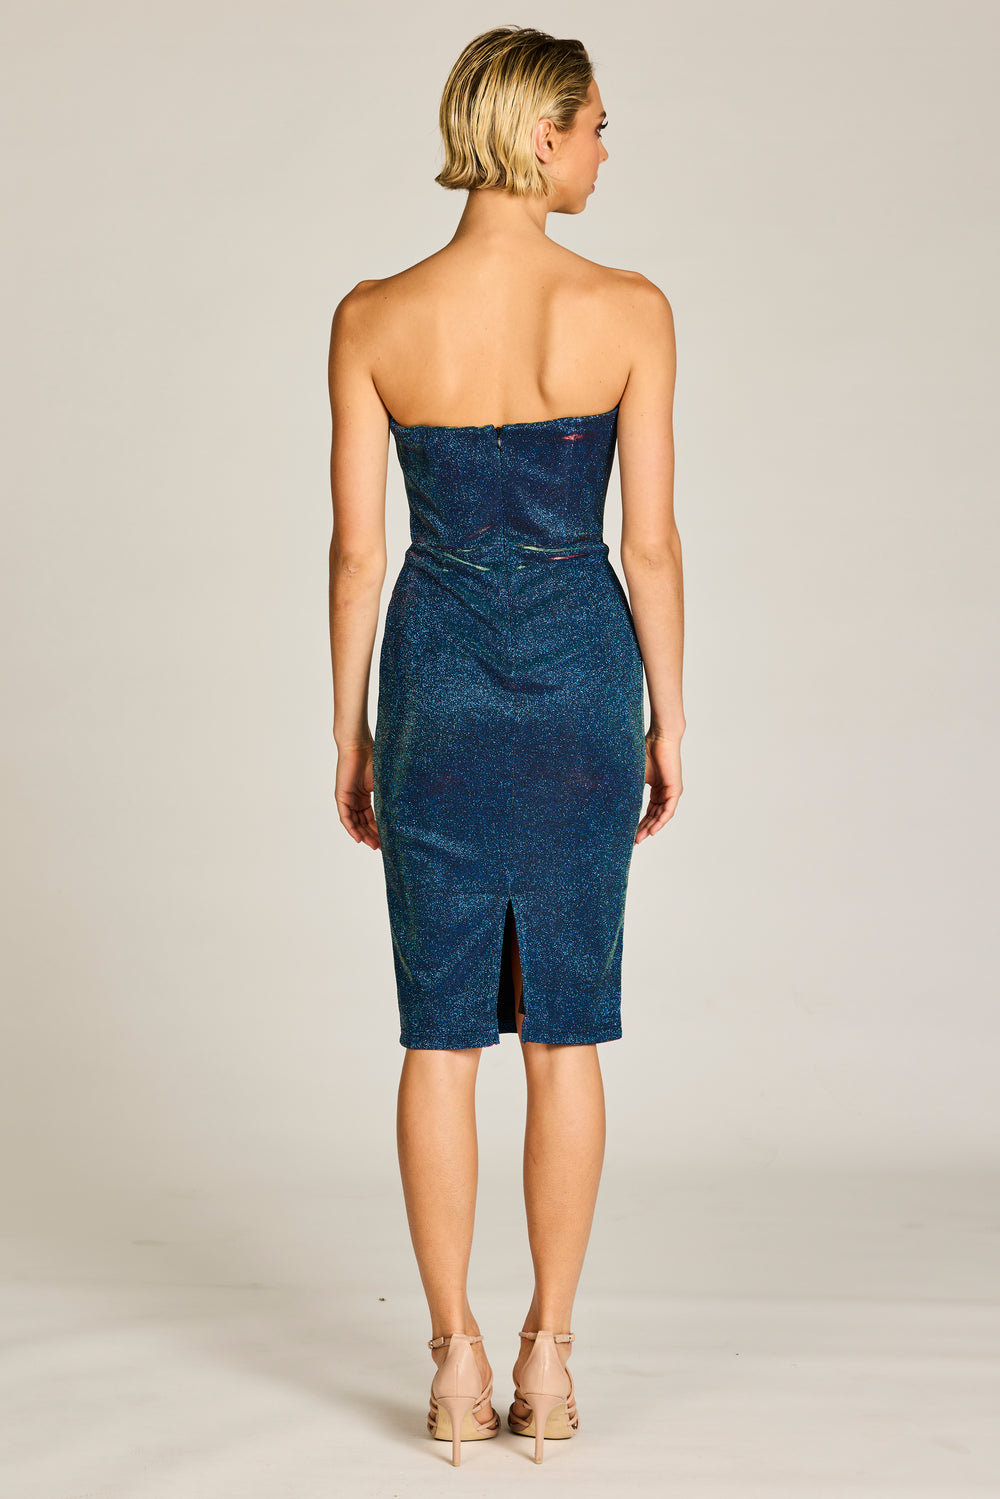 venus navy two tone formal dress from Romance The Labe back view